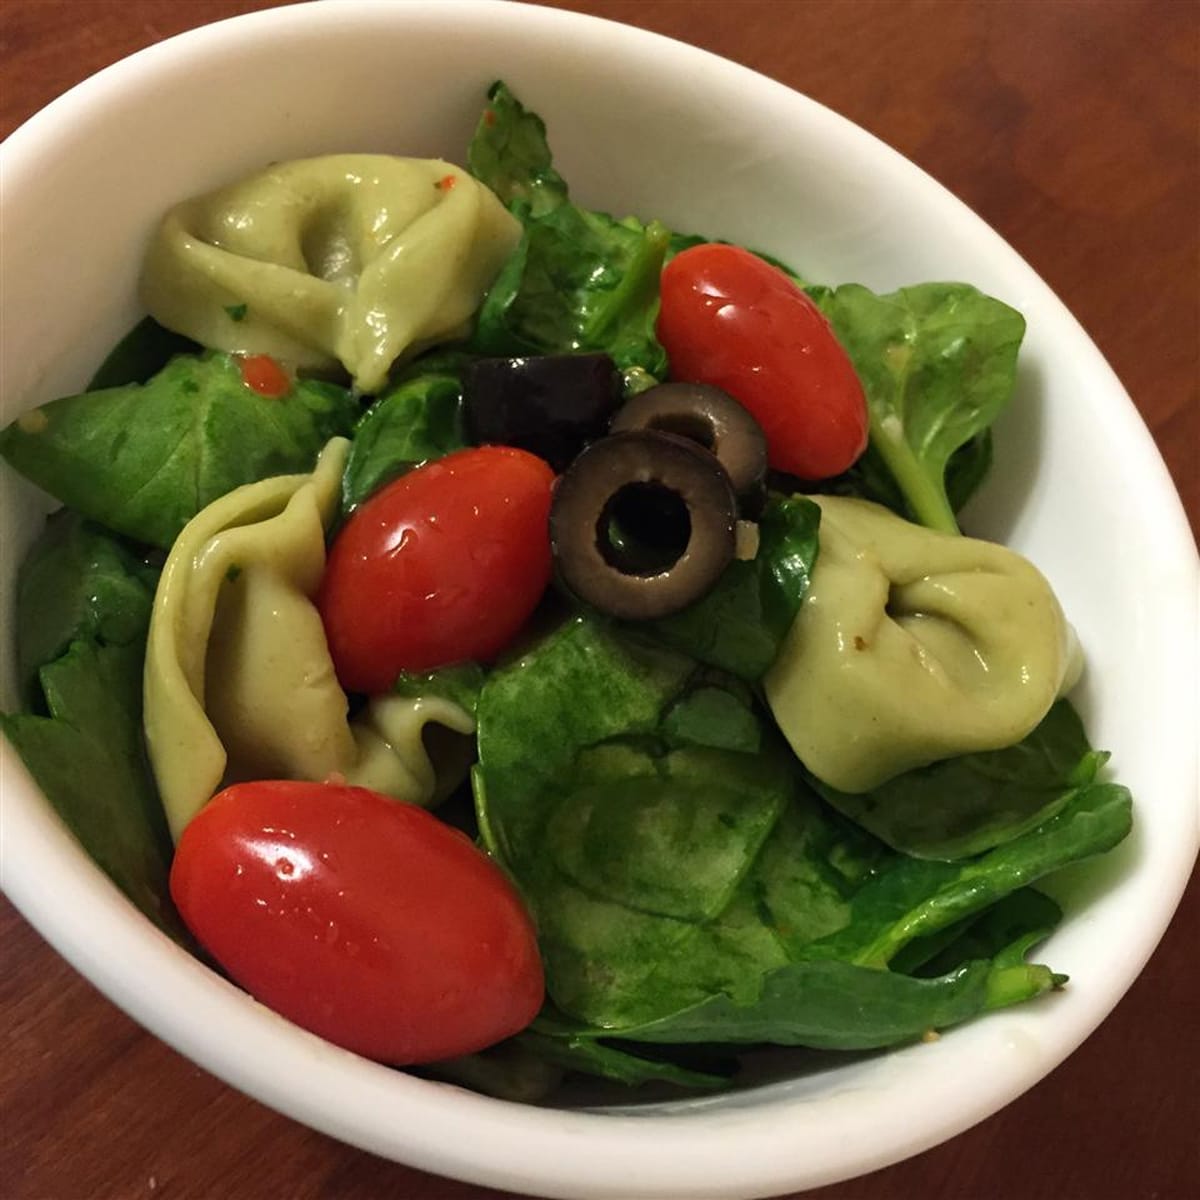 Spinach and tortellini salad